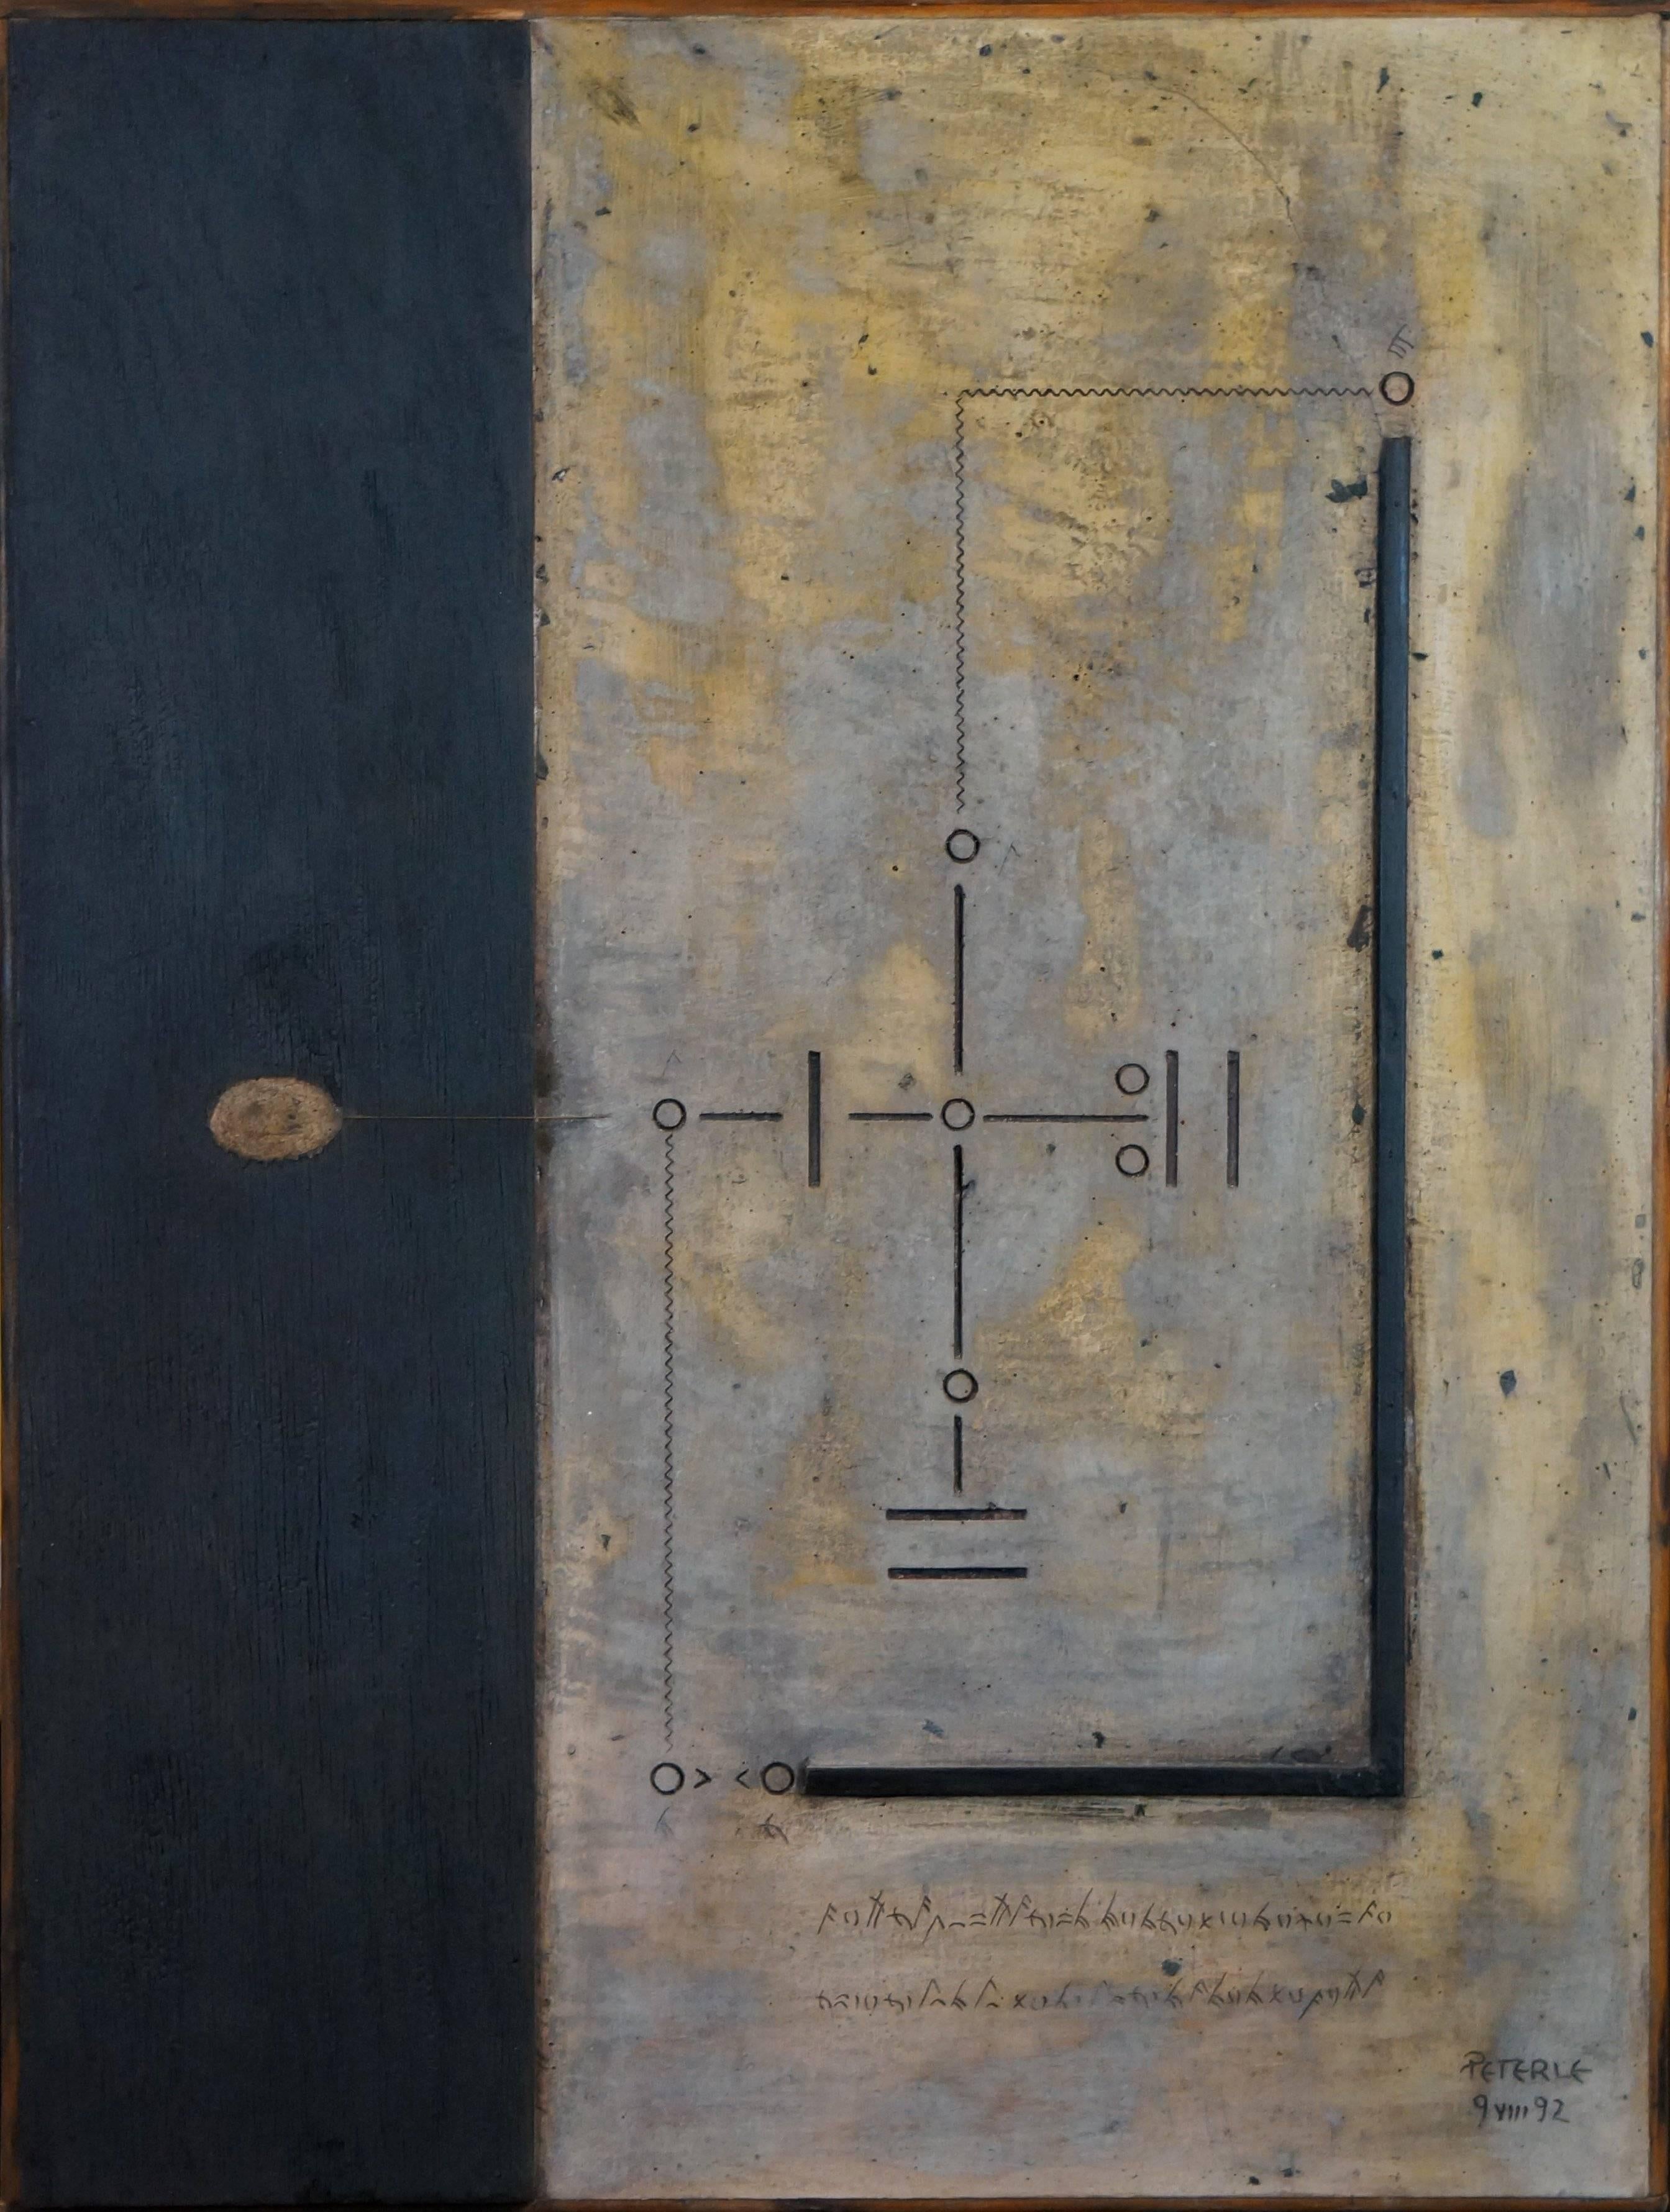 Abstract Composition PIII, 1992 - mixed media, 82x61 cm, framed - Mixed Media Art by Paolo Peterlé